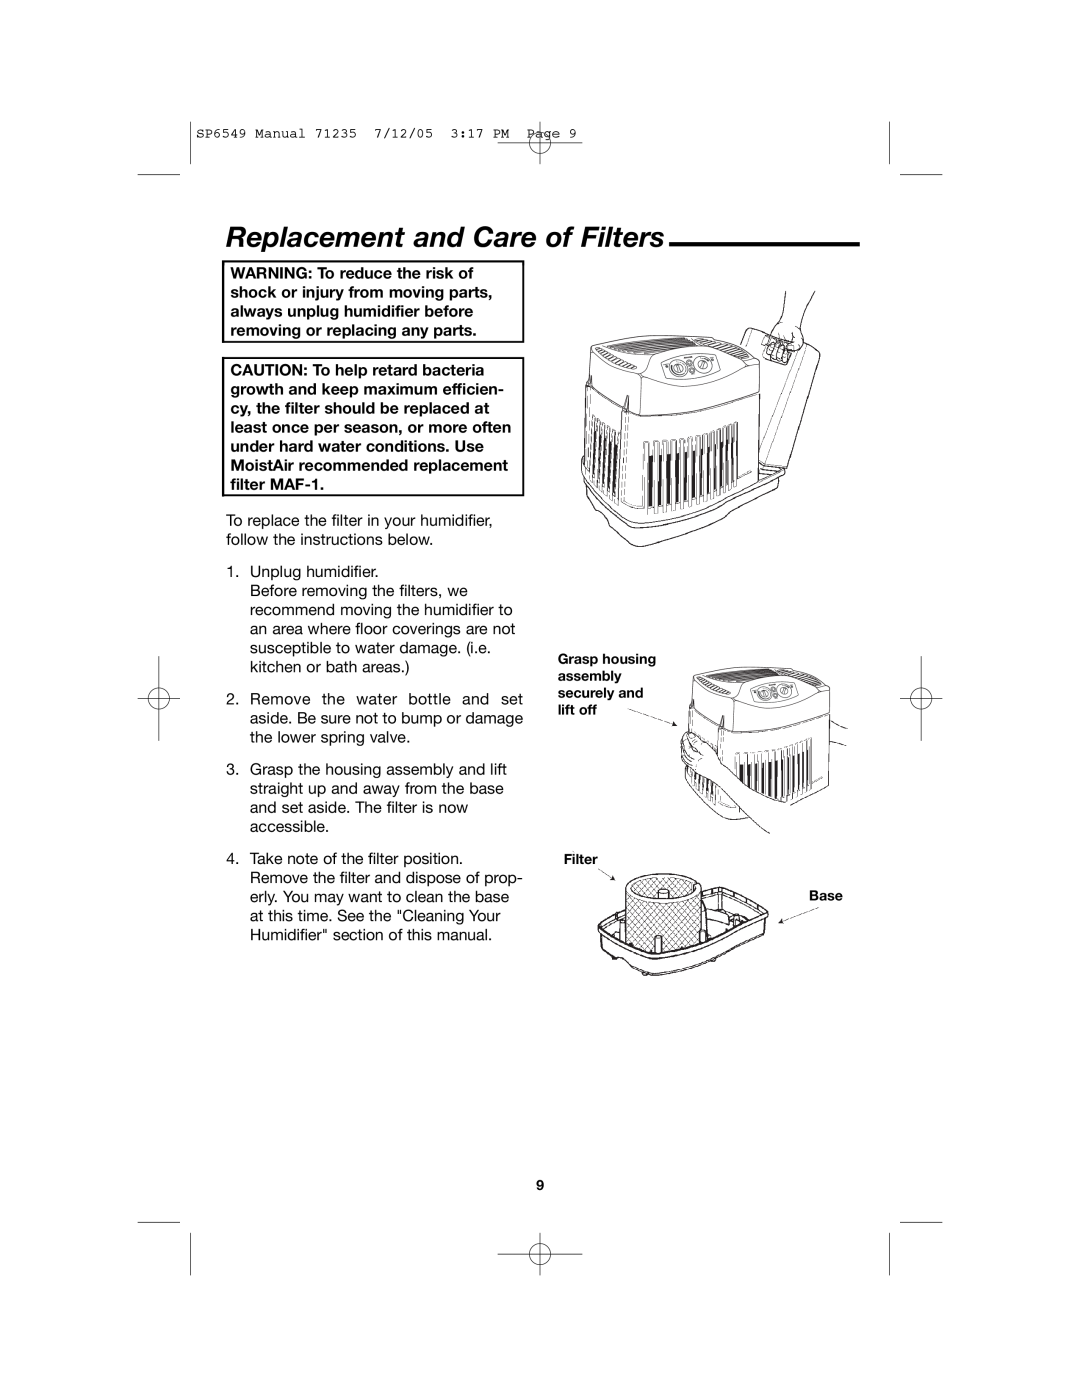 MoistAir MA 0950 owner manual Replacement and Care of Filters 